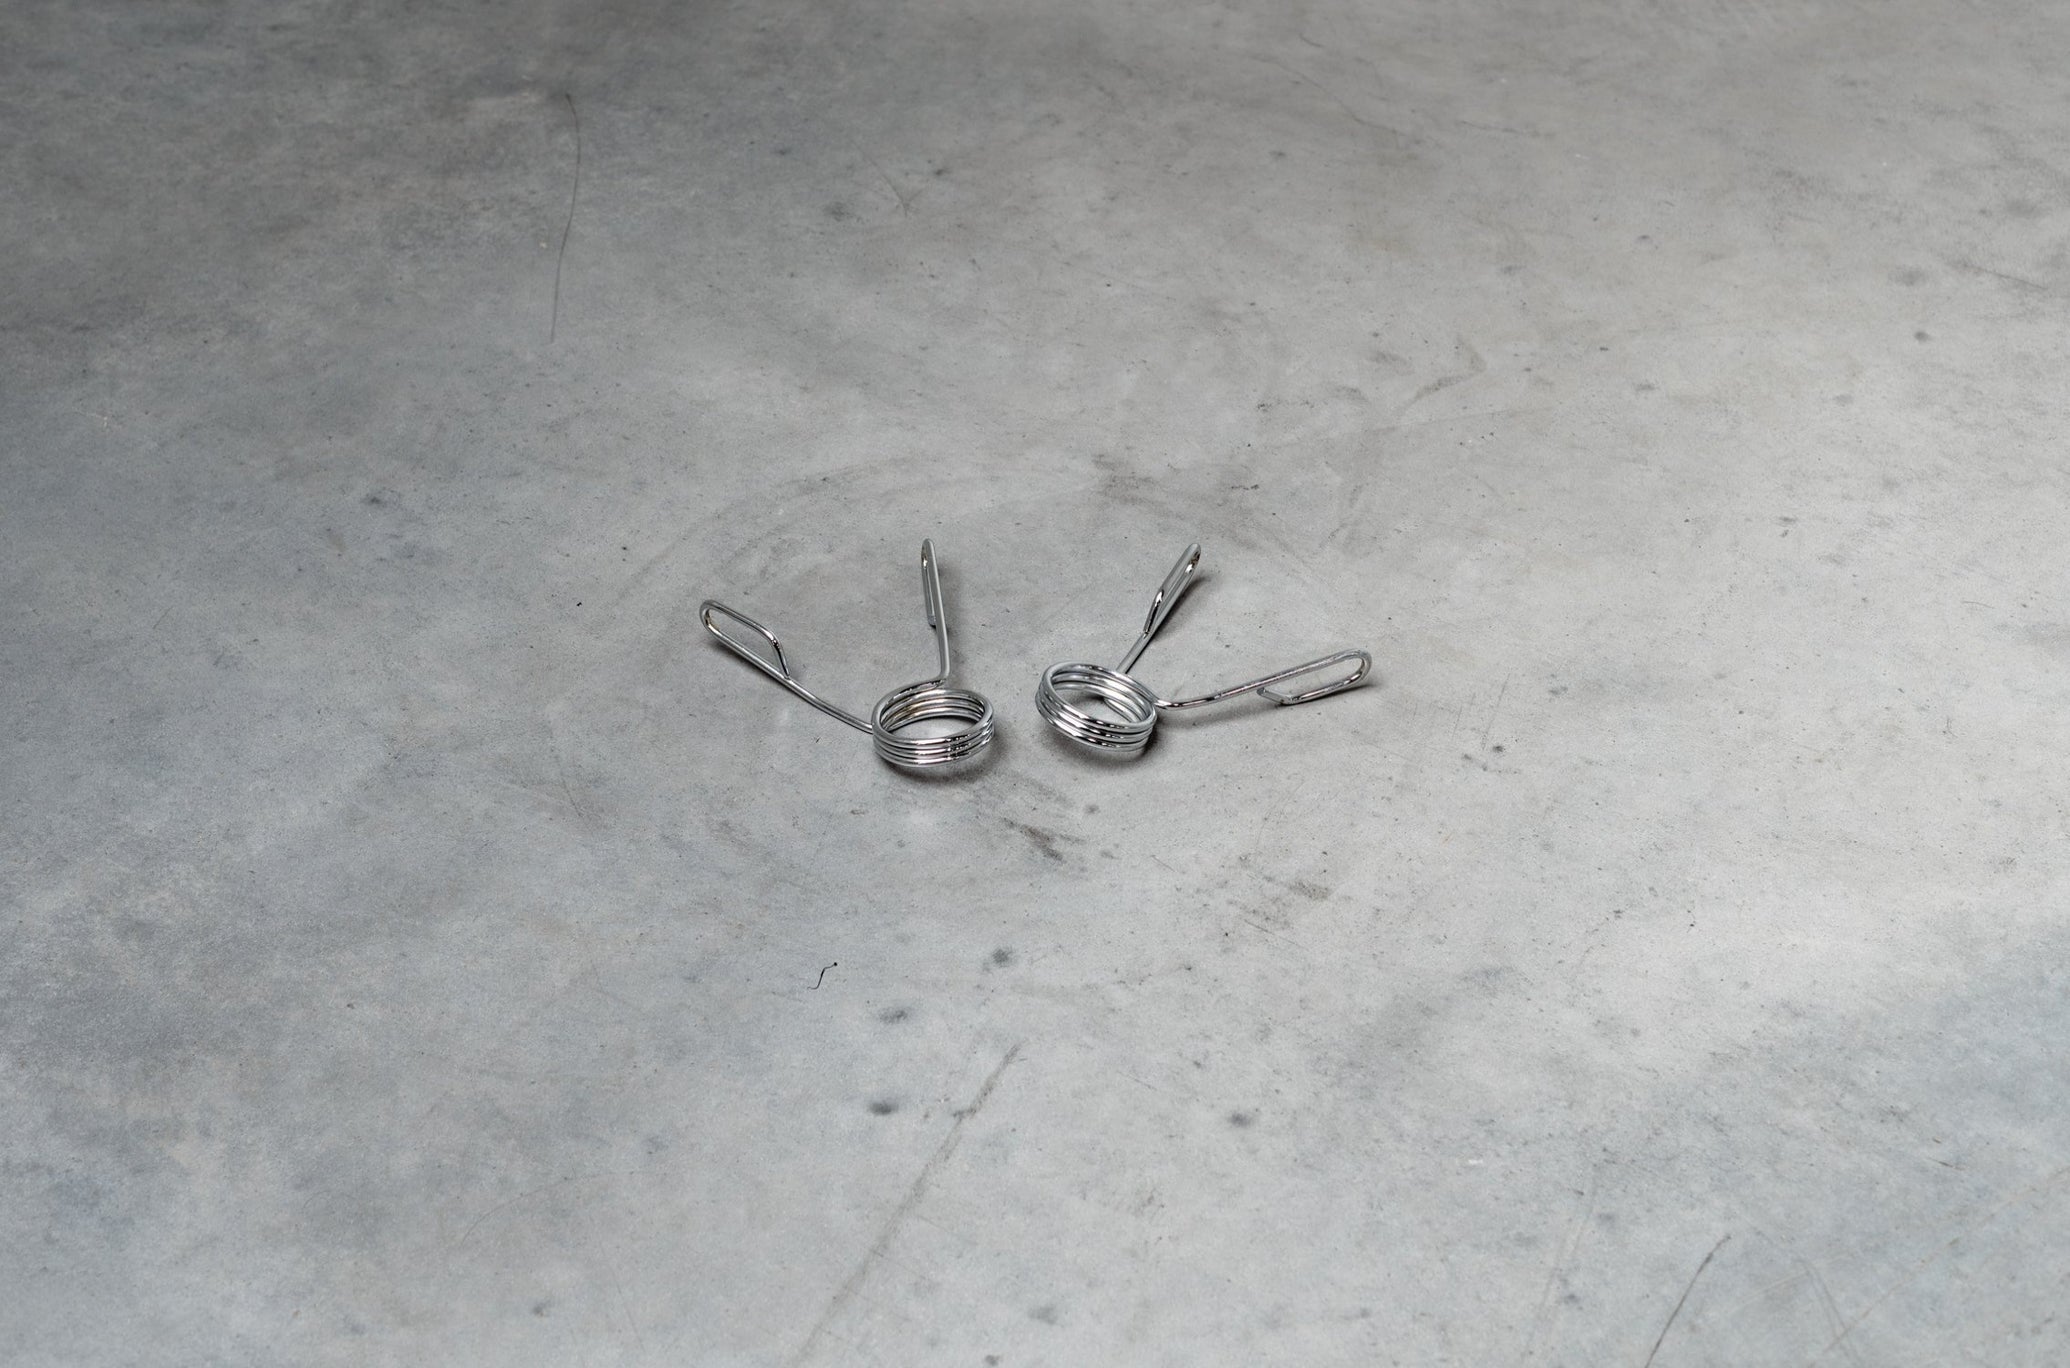 Spring Barbell Collars On Concrete